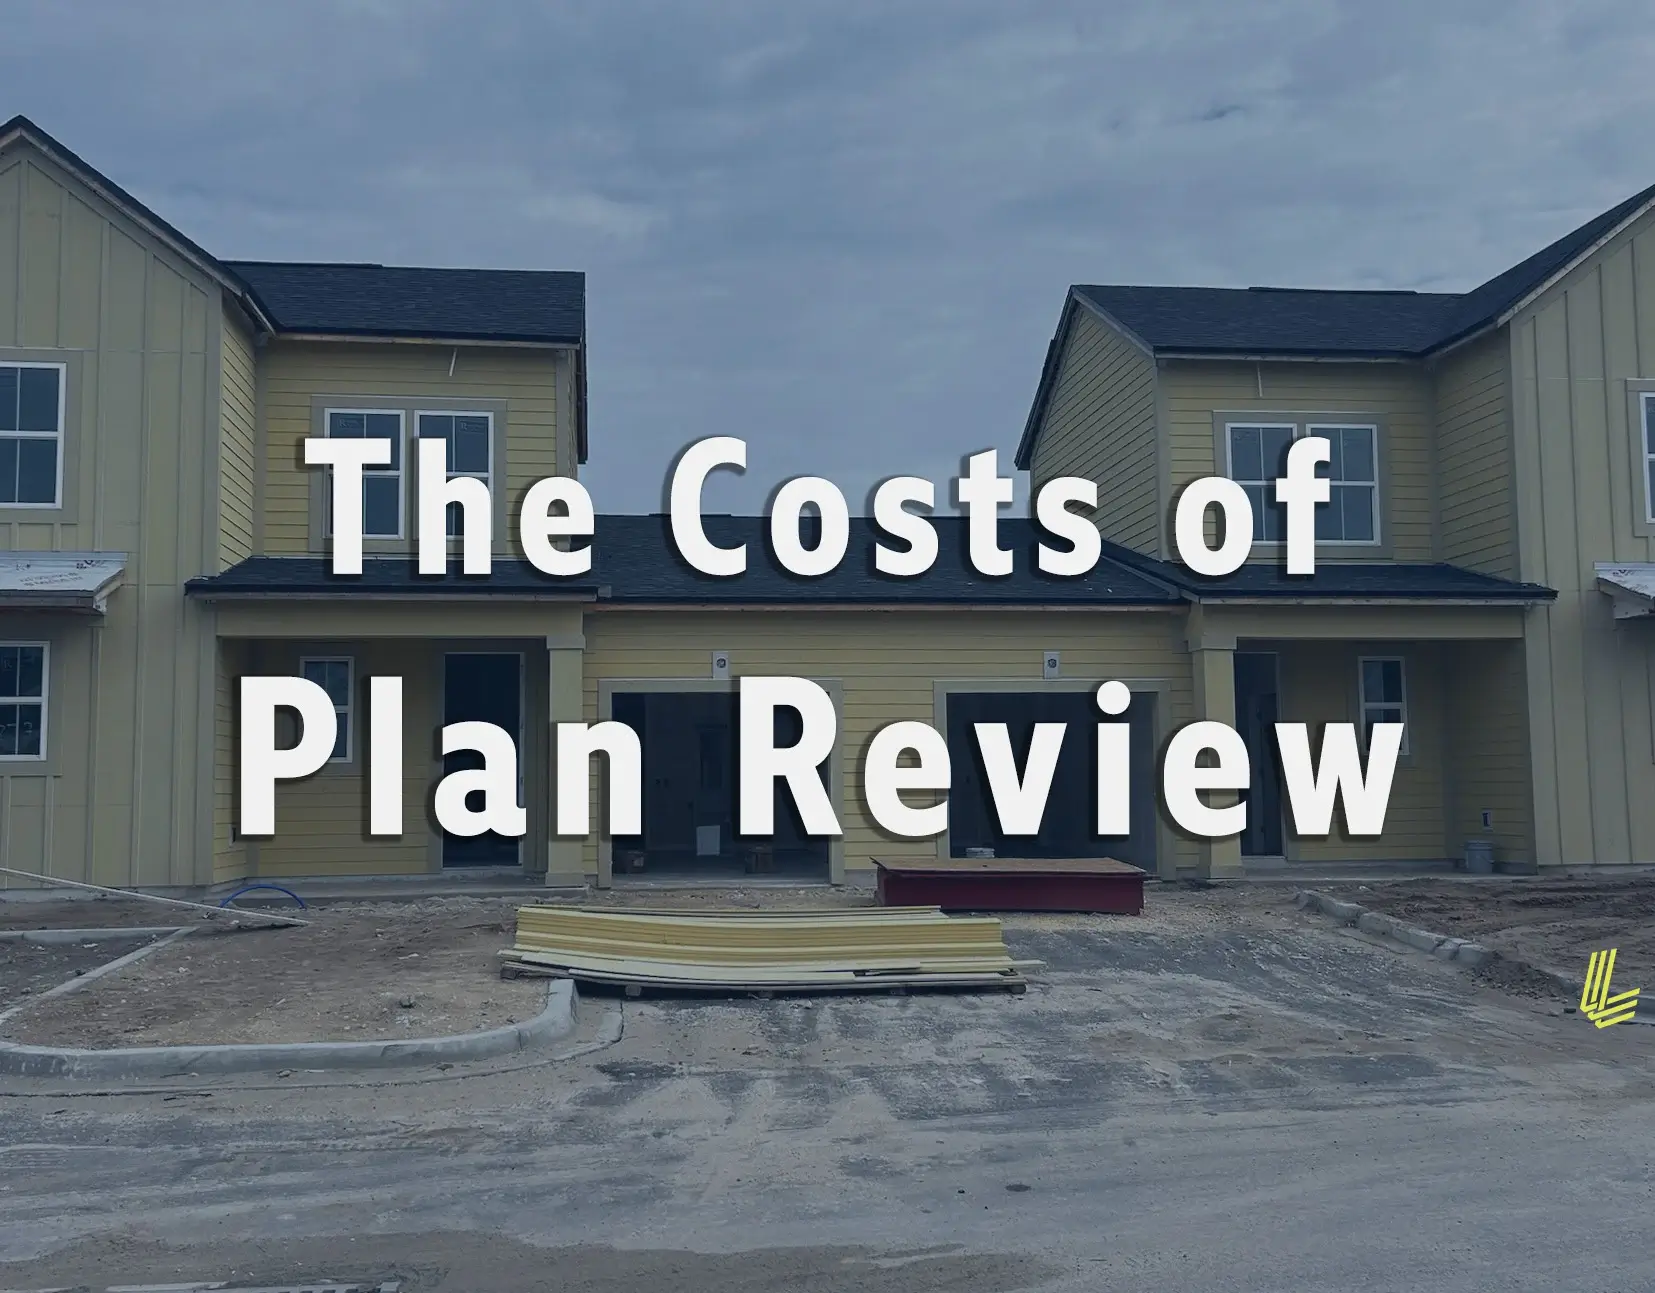 The Costs of Plan Review